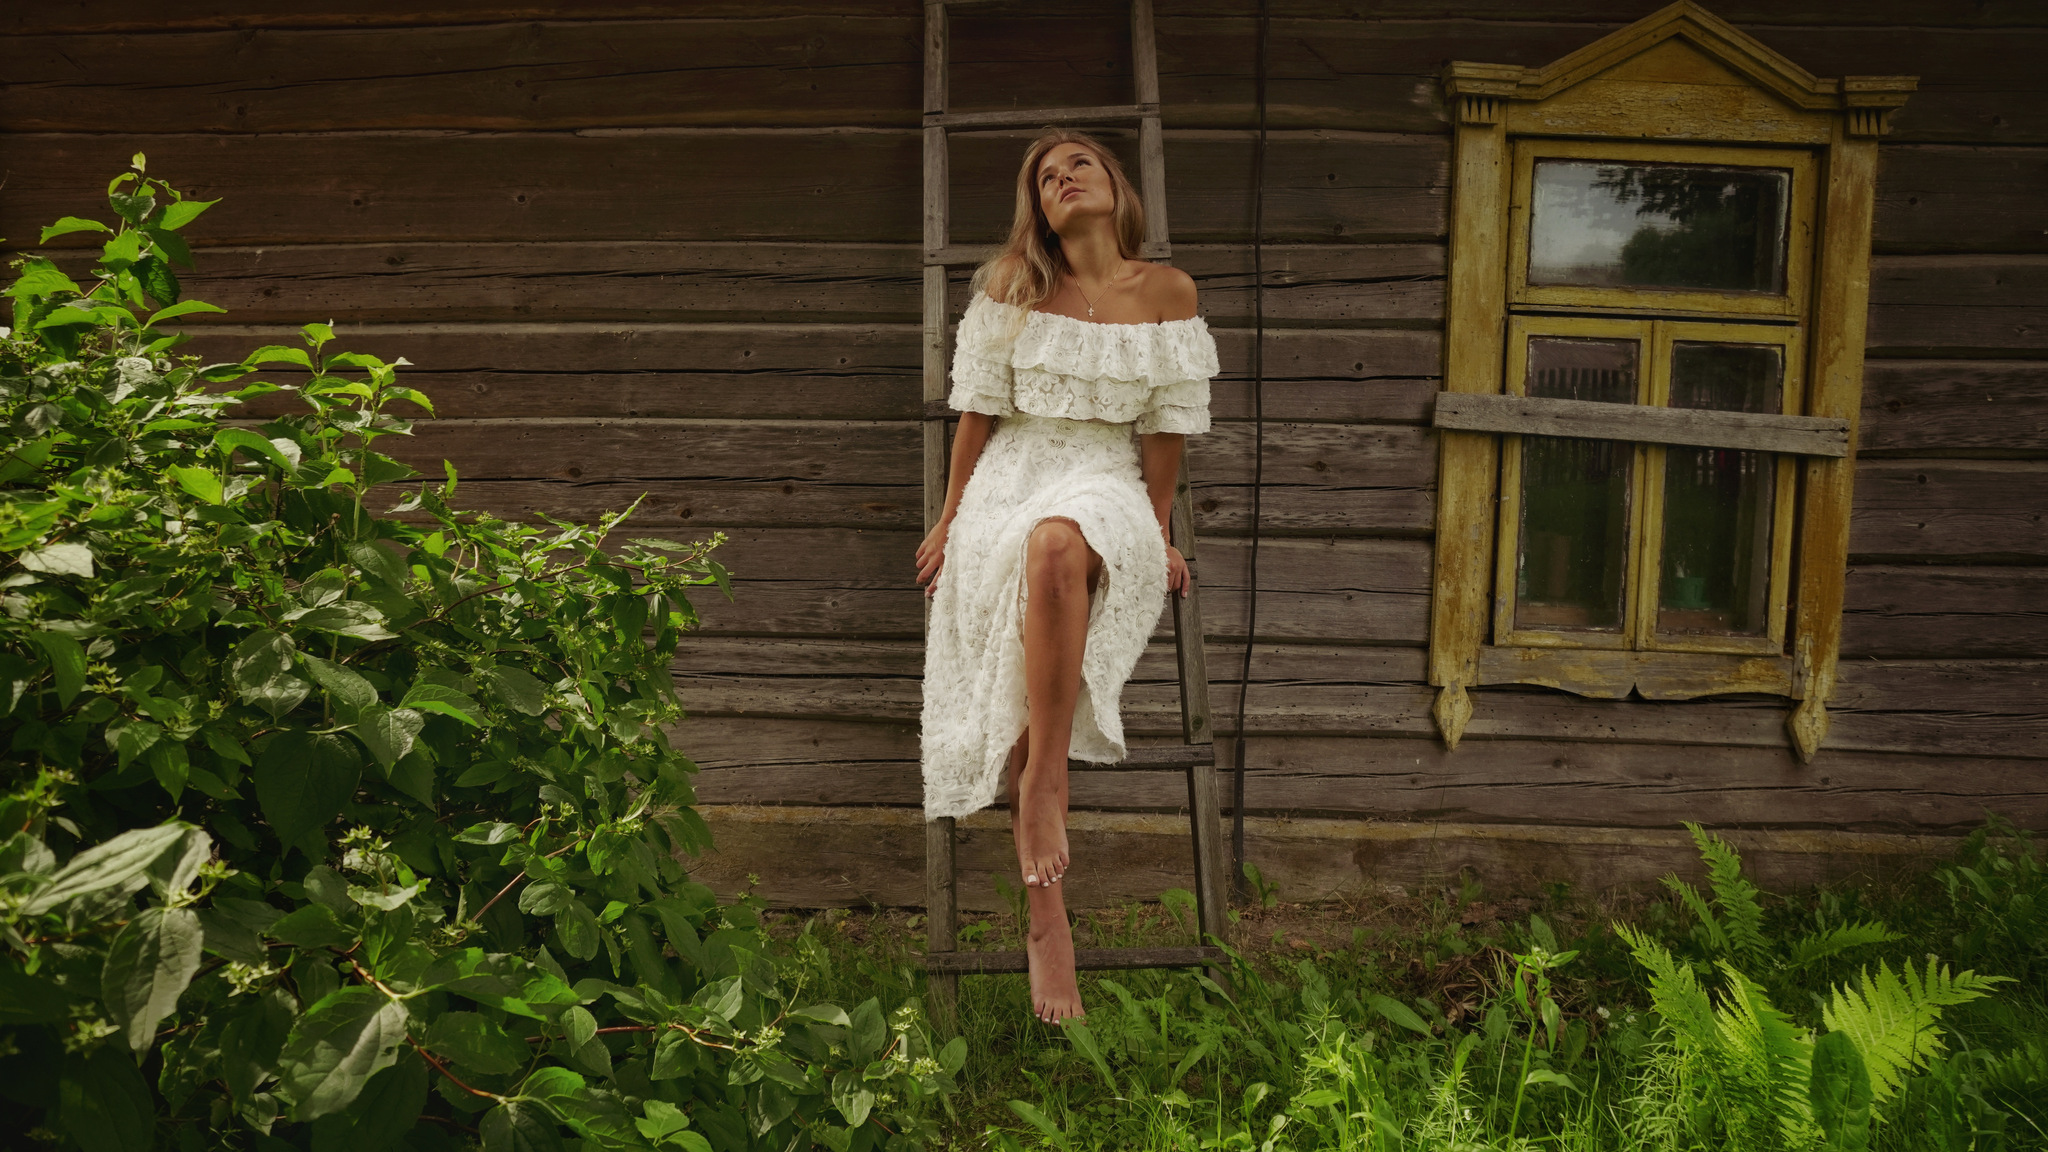 People 2048x1152 women women outdoors outdoors blonde white dress bare shoulders barefoot ladder pointed toes